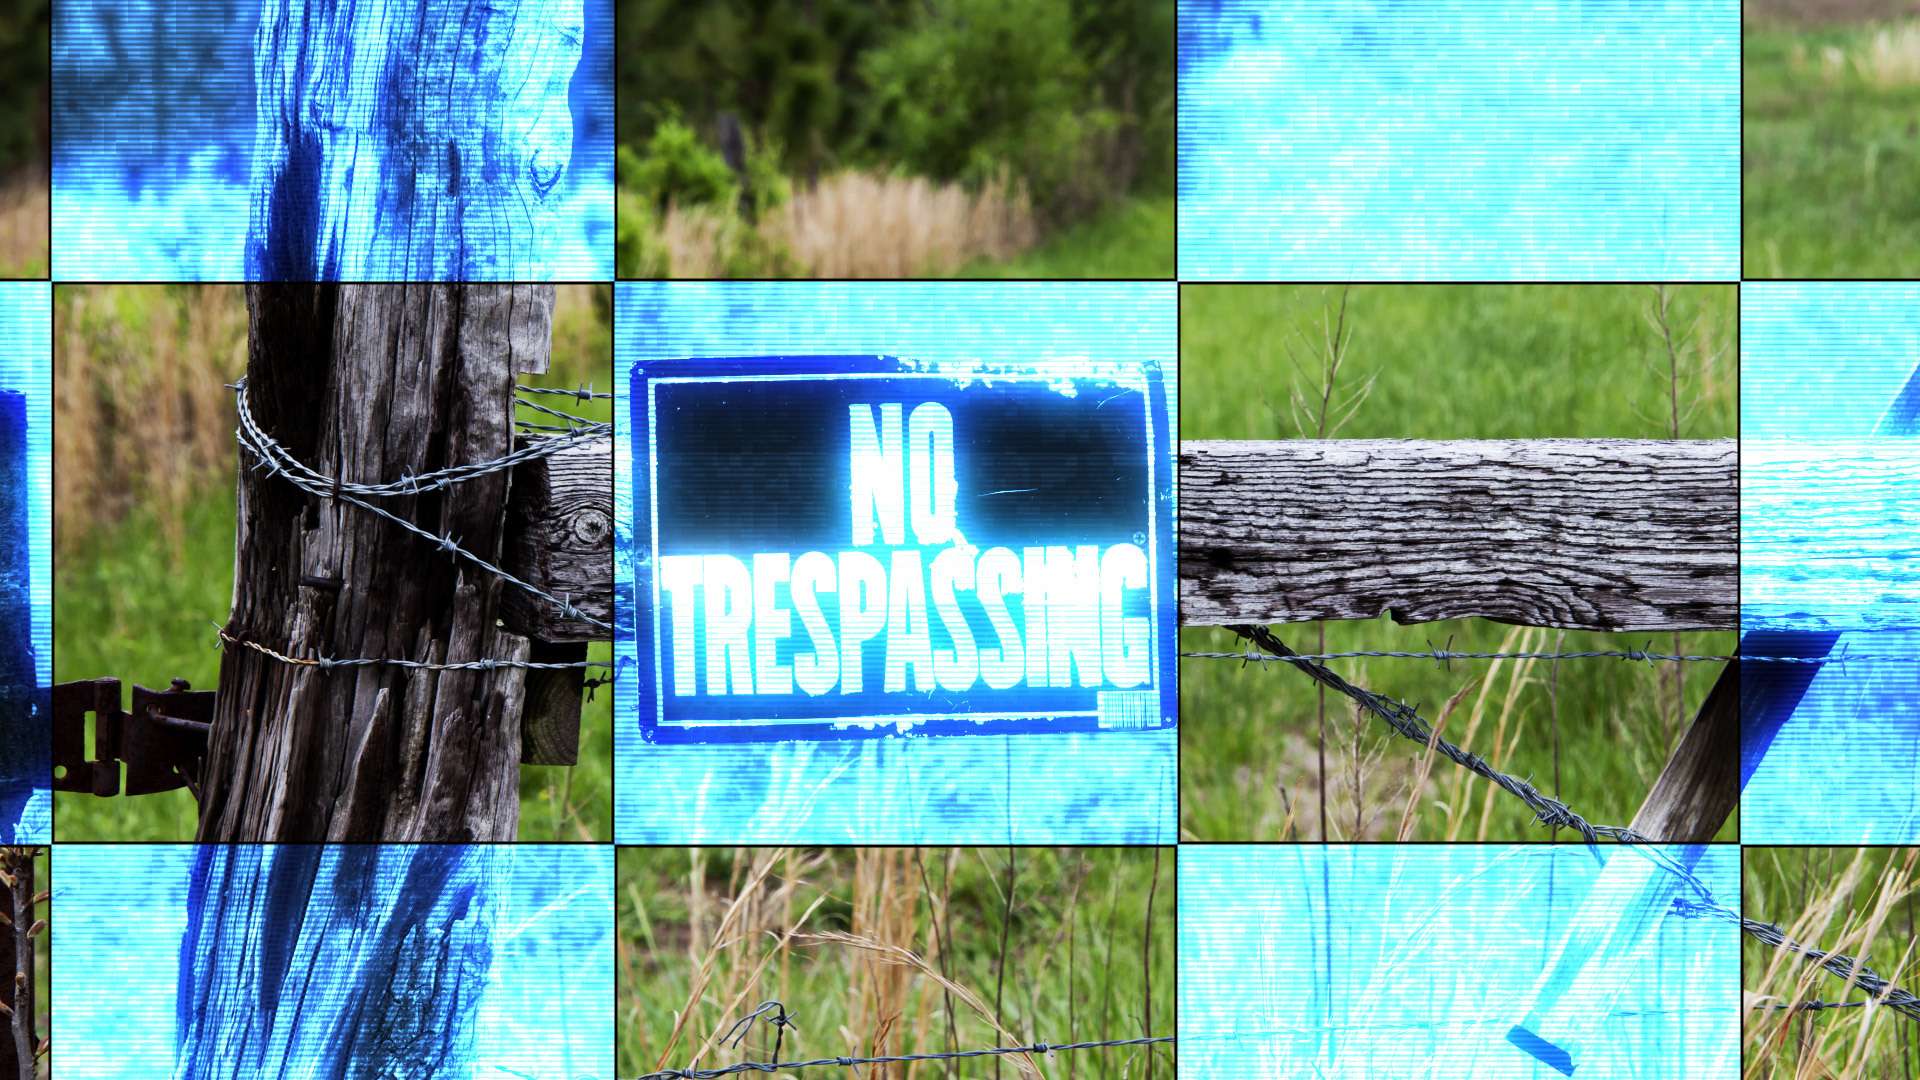 Tennessee appeals court rules against wildlife agents who planted cameras on private land